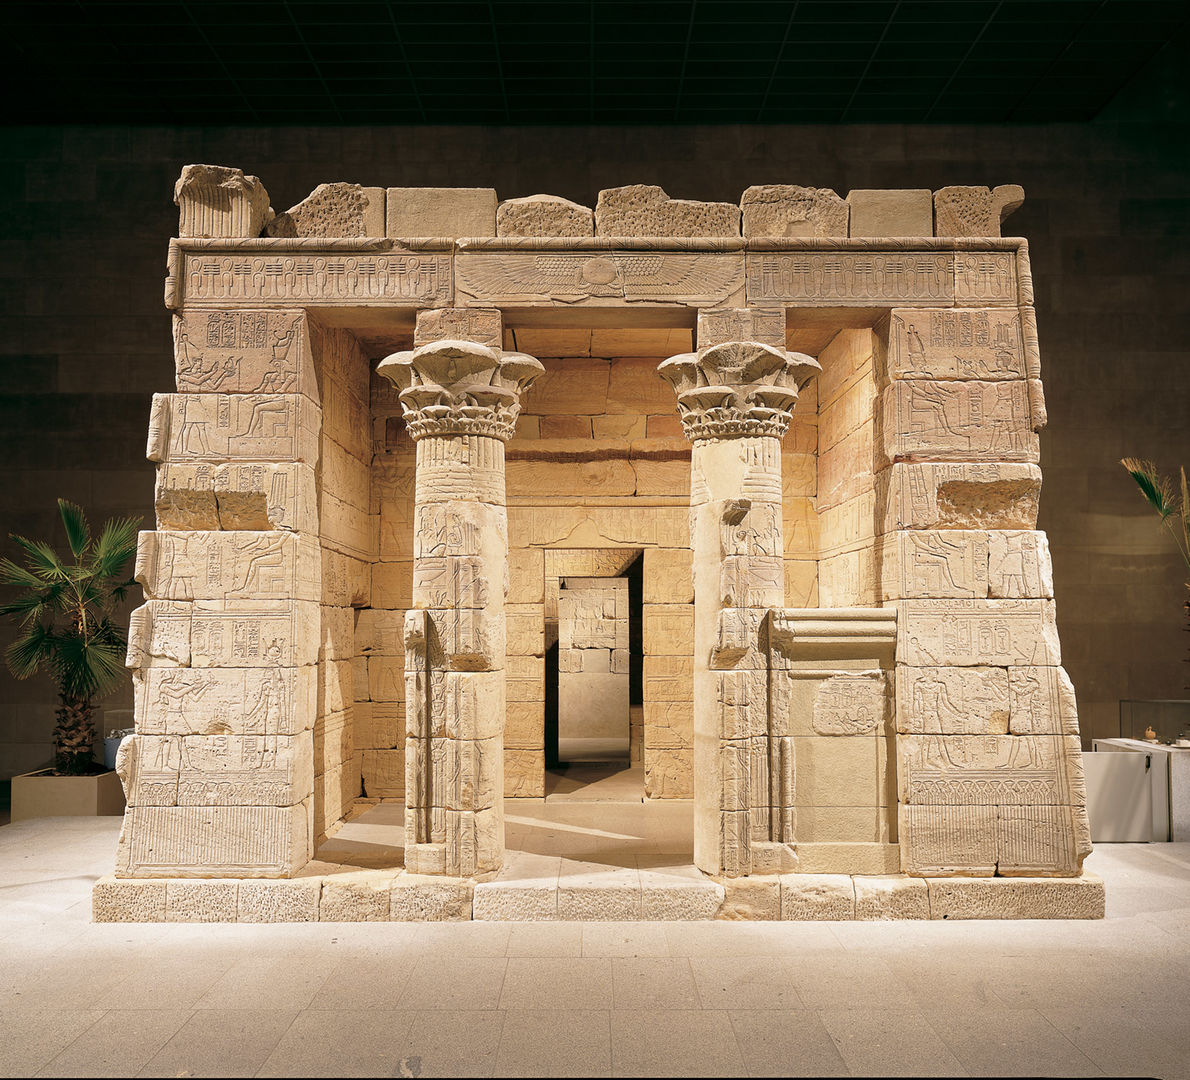 The Temple of Dendur, Roman Period, reign of Augustus Caesar, ca. 15 B.C. Egypt, Nubia, Dendur, west bank of the Nile River, 50 miles south of Aswan. Aeolian Sandstone; L. from gate to rear of temple 24 m 60 cm (82 ft.). Given to the United States by Egypt in 1965, awarded to The Metropolitan Museum of Art in 1967, and installed in The Sackler Wing in 1978 (68.154)